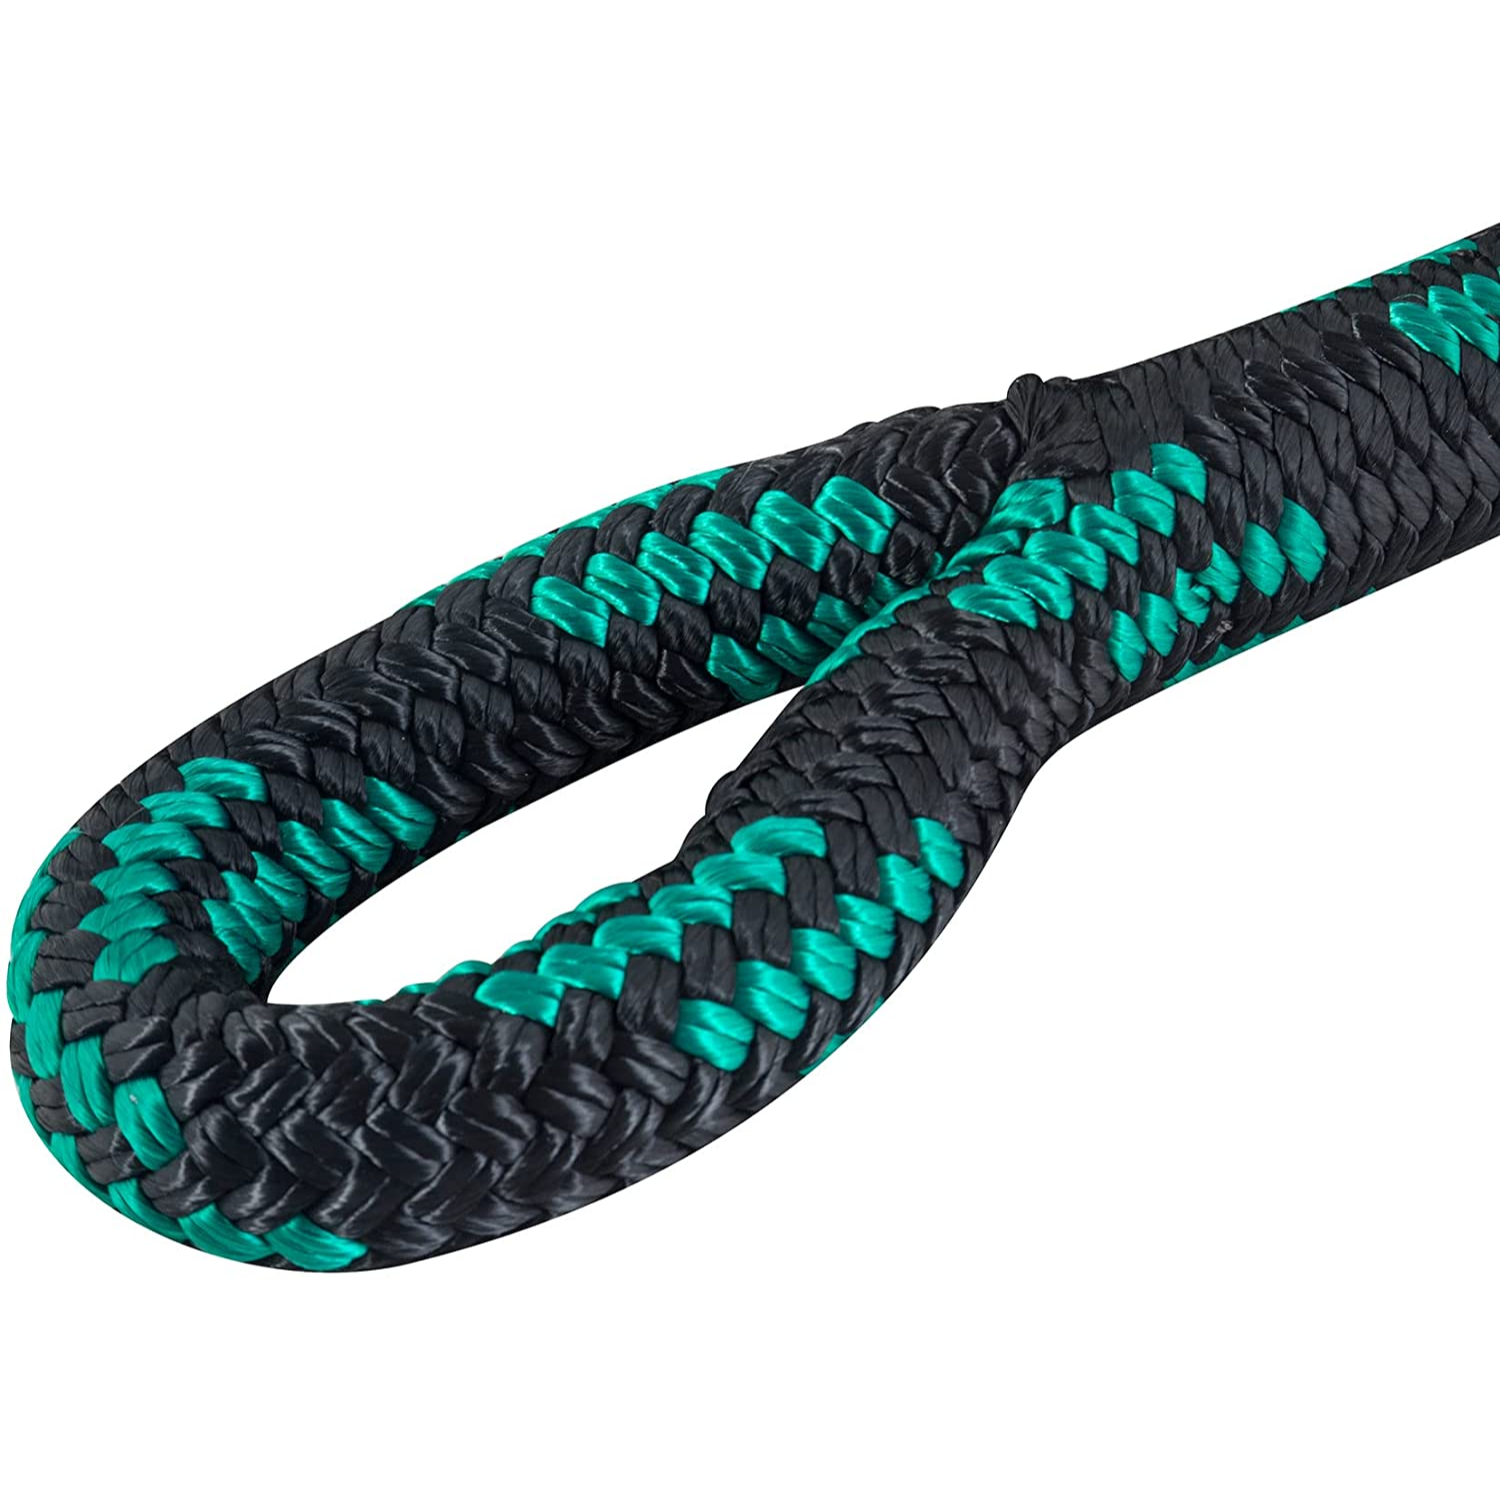 American Lifting Off-Road Kinetic Recovery Rope – Heavy Duty Tow Strap 33,200 Lbs